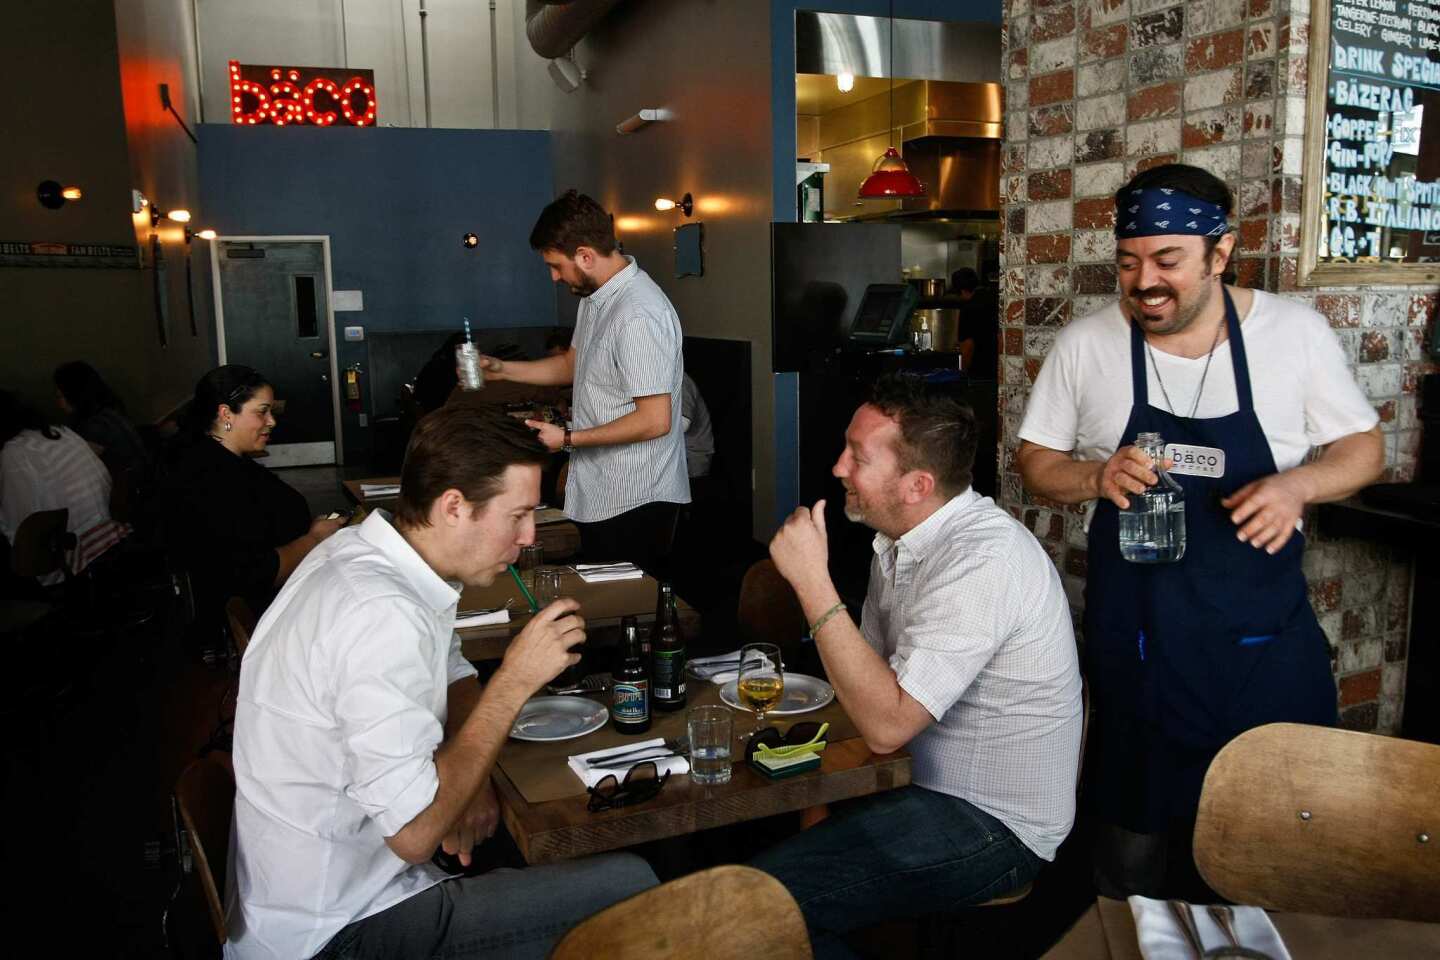 Alex Pauley, right, waits on customers inside Baco Mercat. The menu offers several small plates.